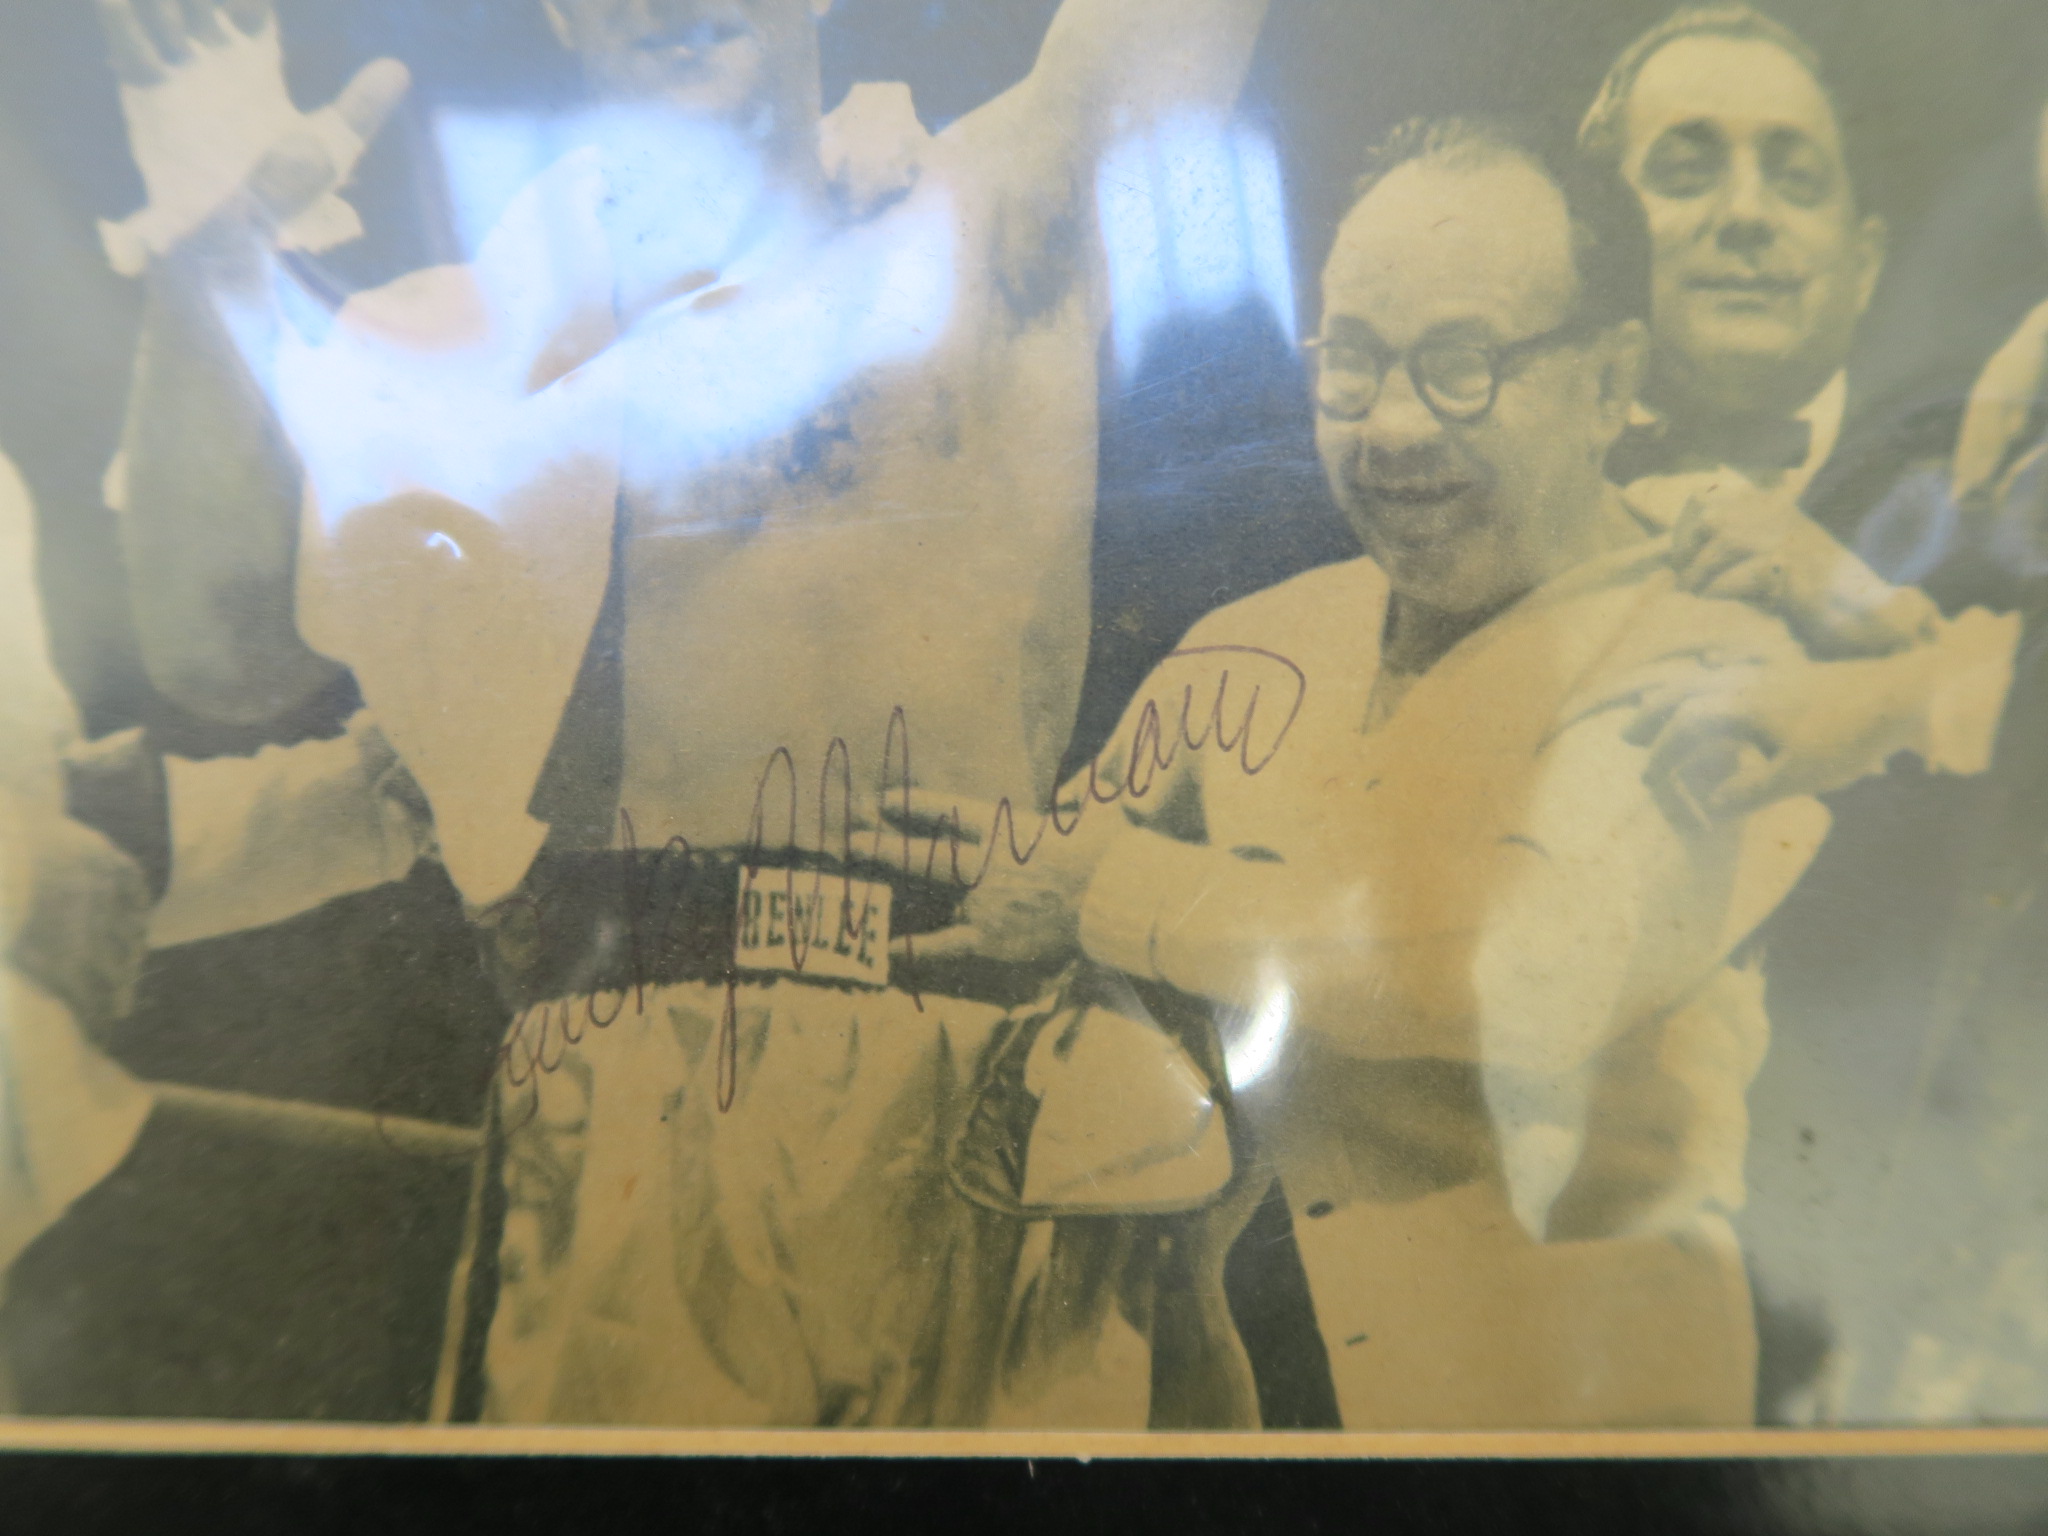 Rocky Marciano original autograph of the unbeaten World Heavyweight Champion. The autograph is on - Image 2 of 4